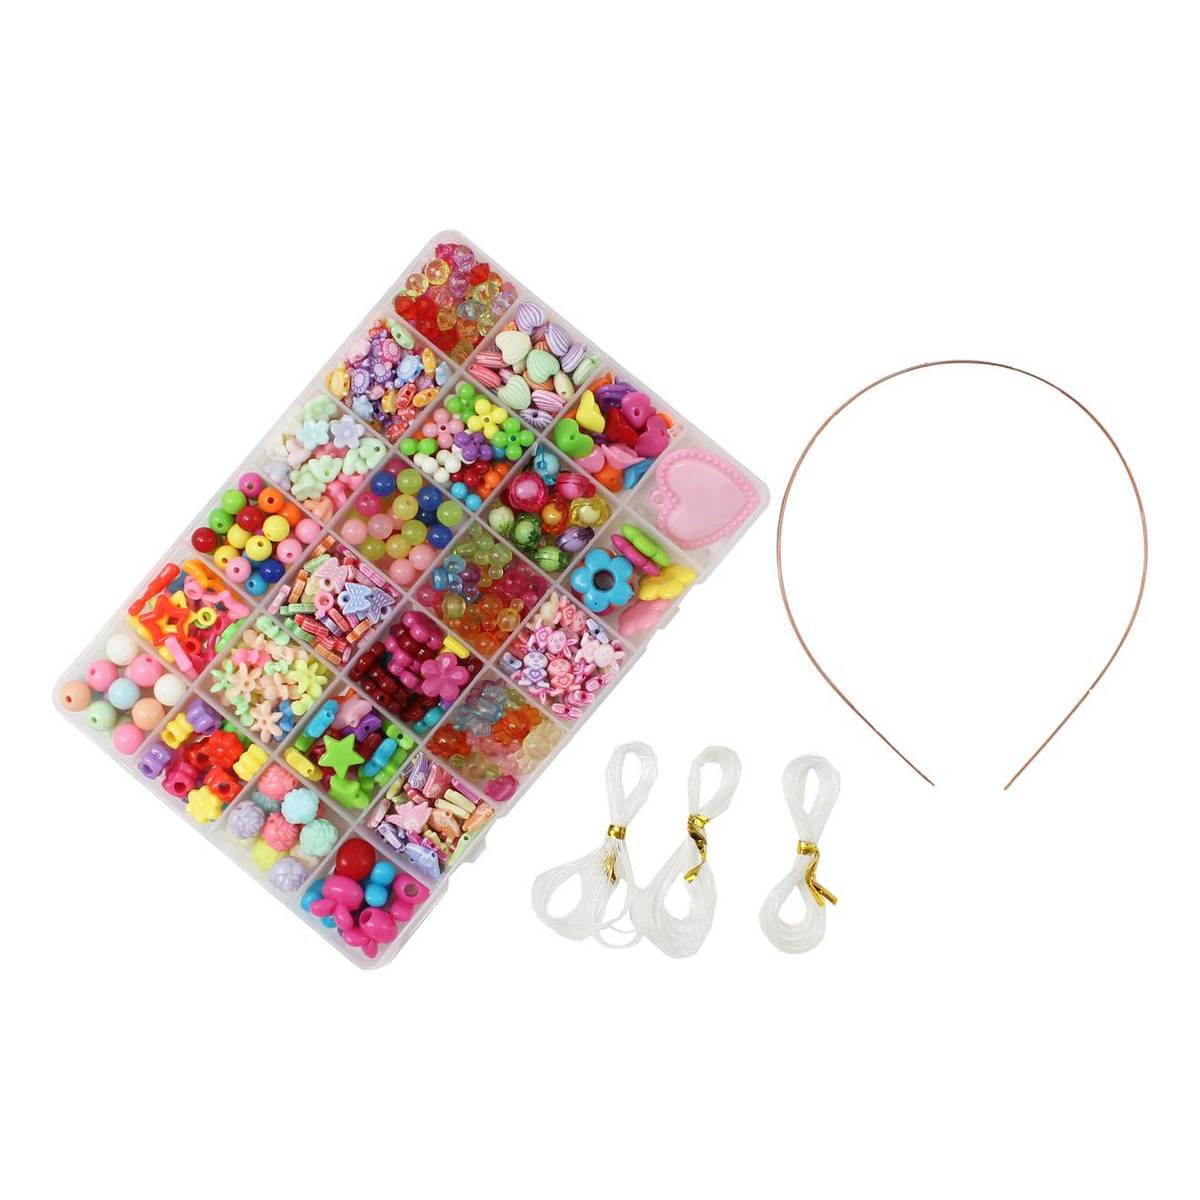 Assorted Bright Bead Box Kit 600 Pieces